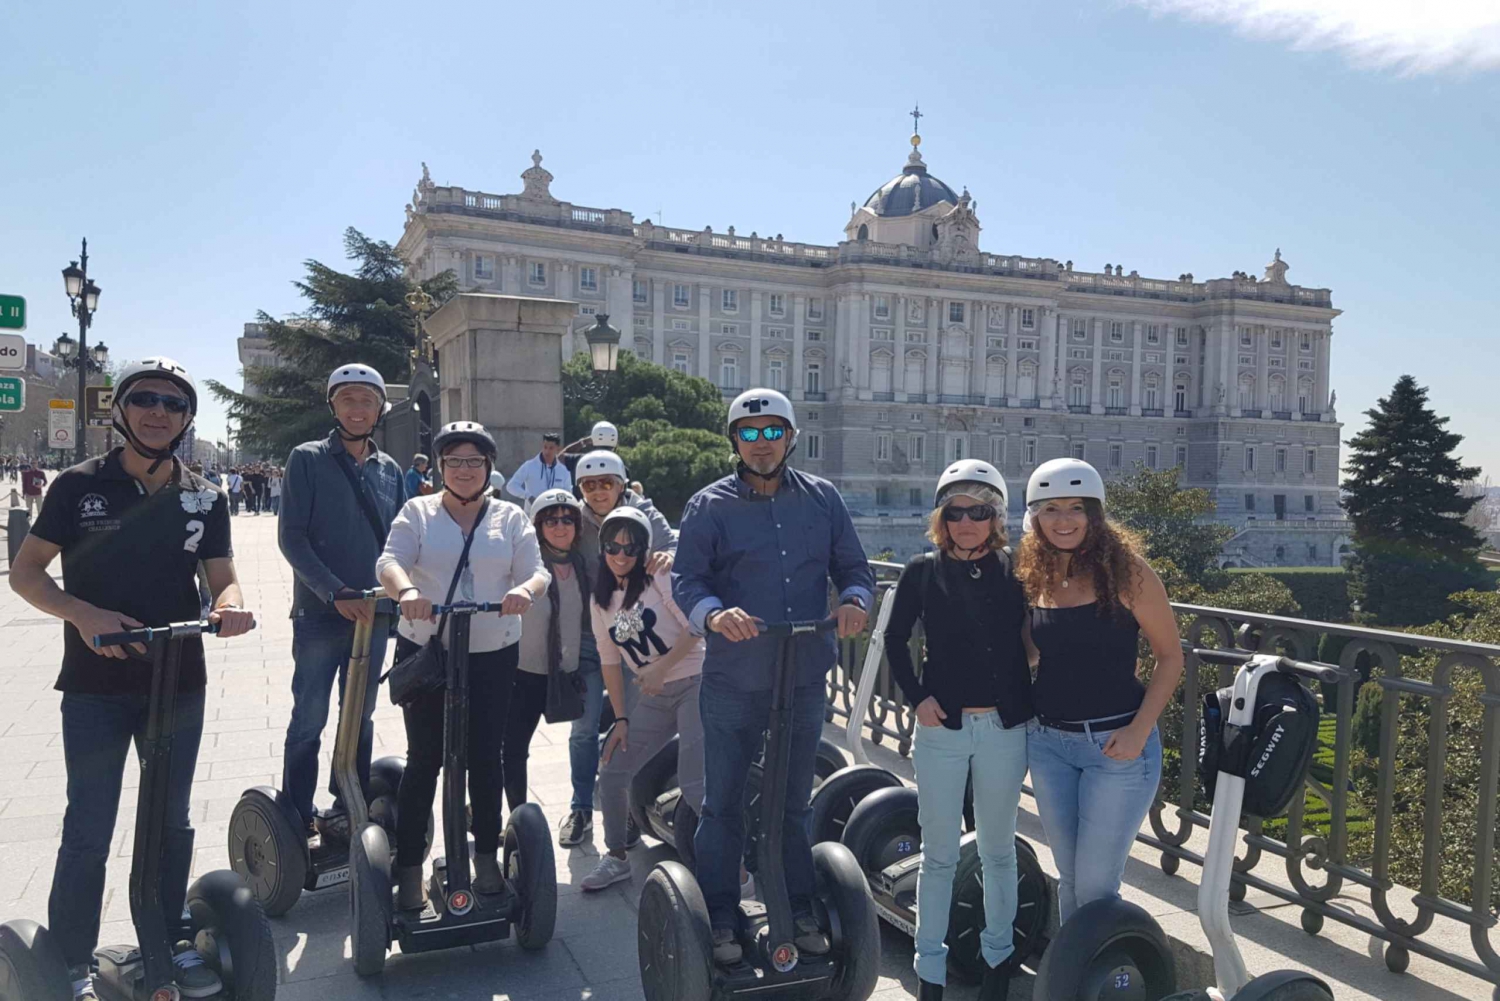 Madrid: Private Sightseeing Segway Tour and Plaza Mayor